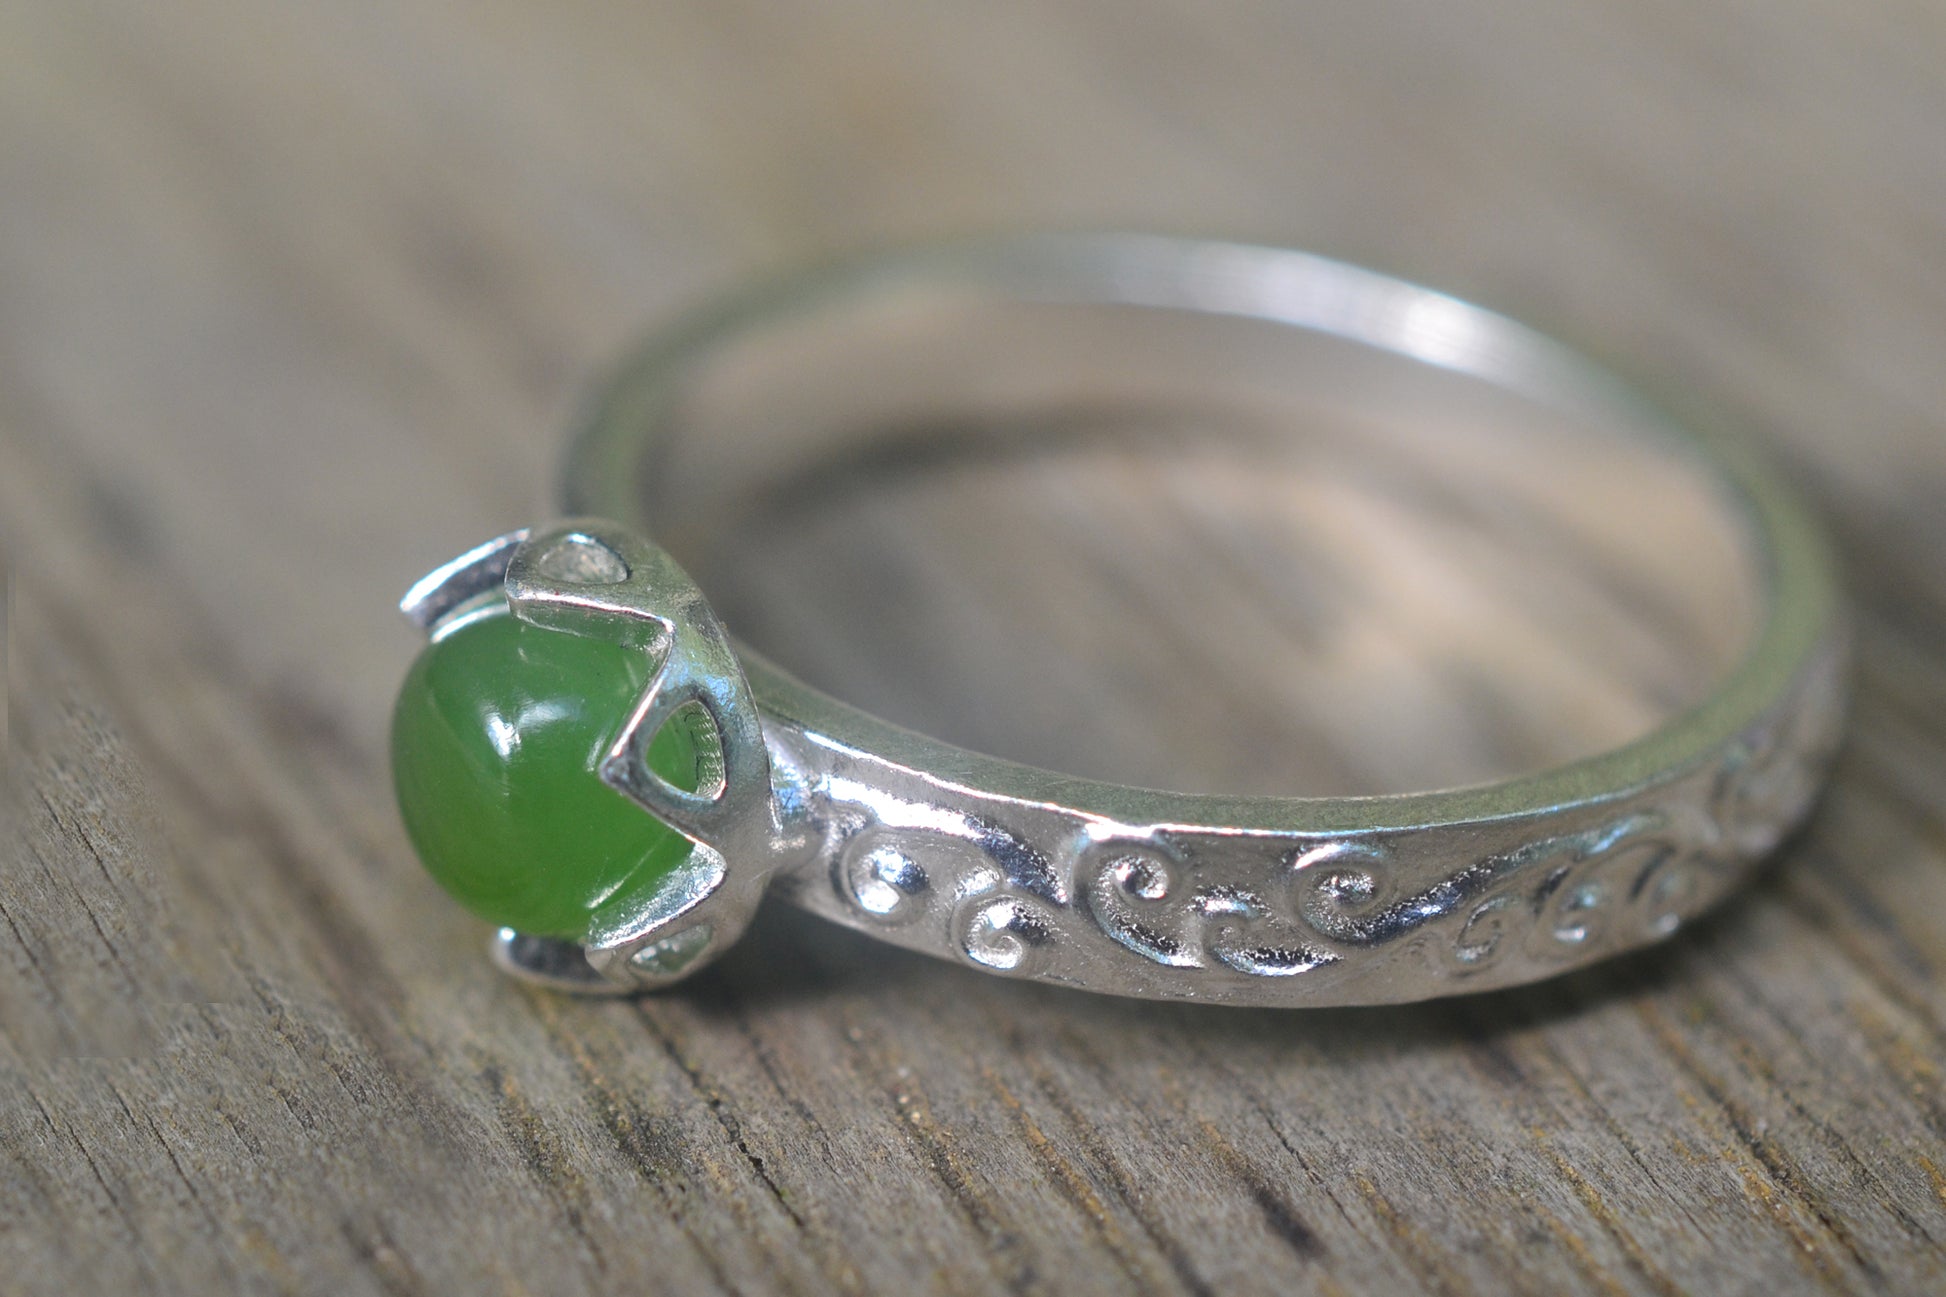 5mm Jade Ring With Silver Swirl Design